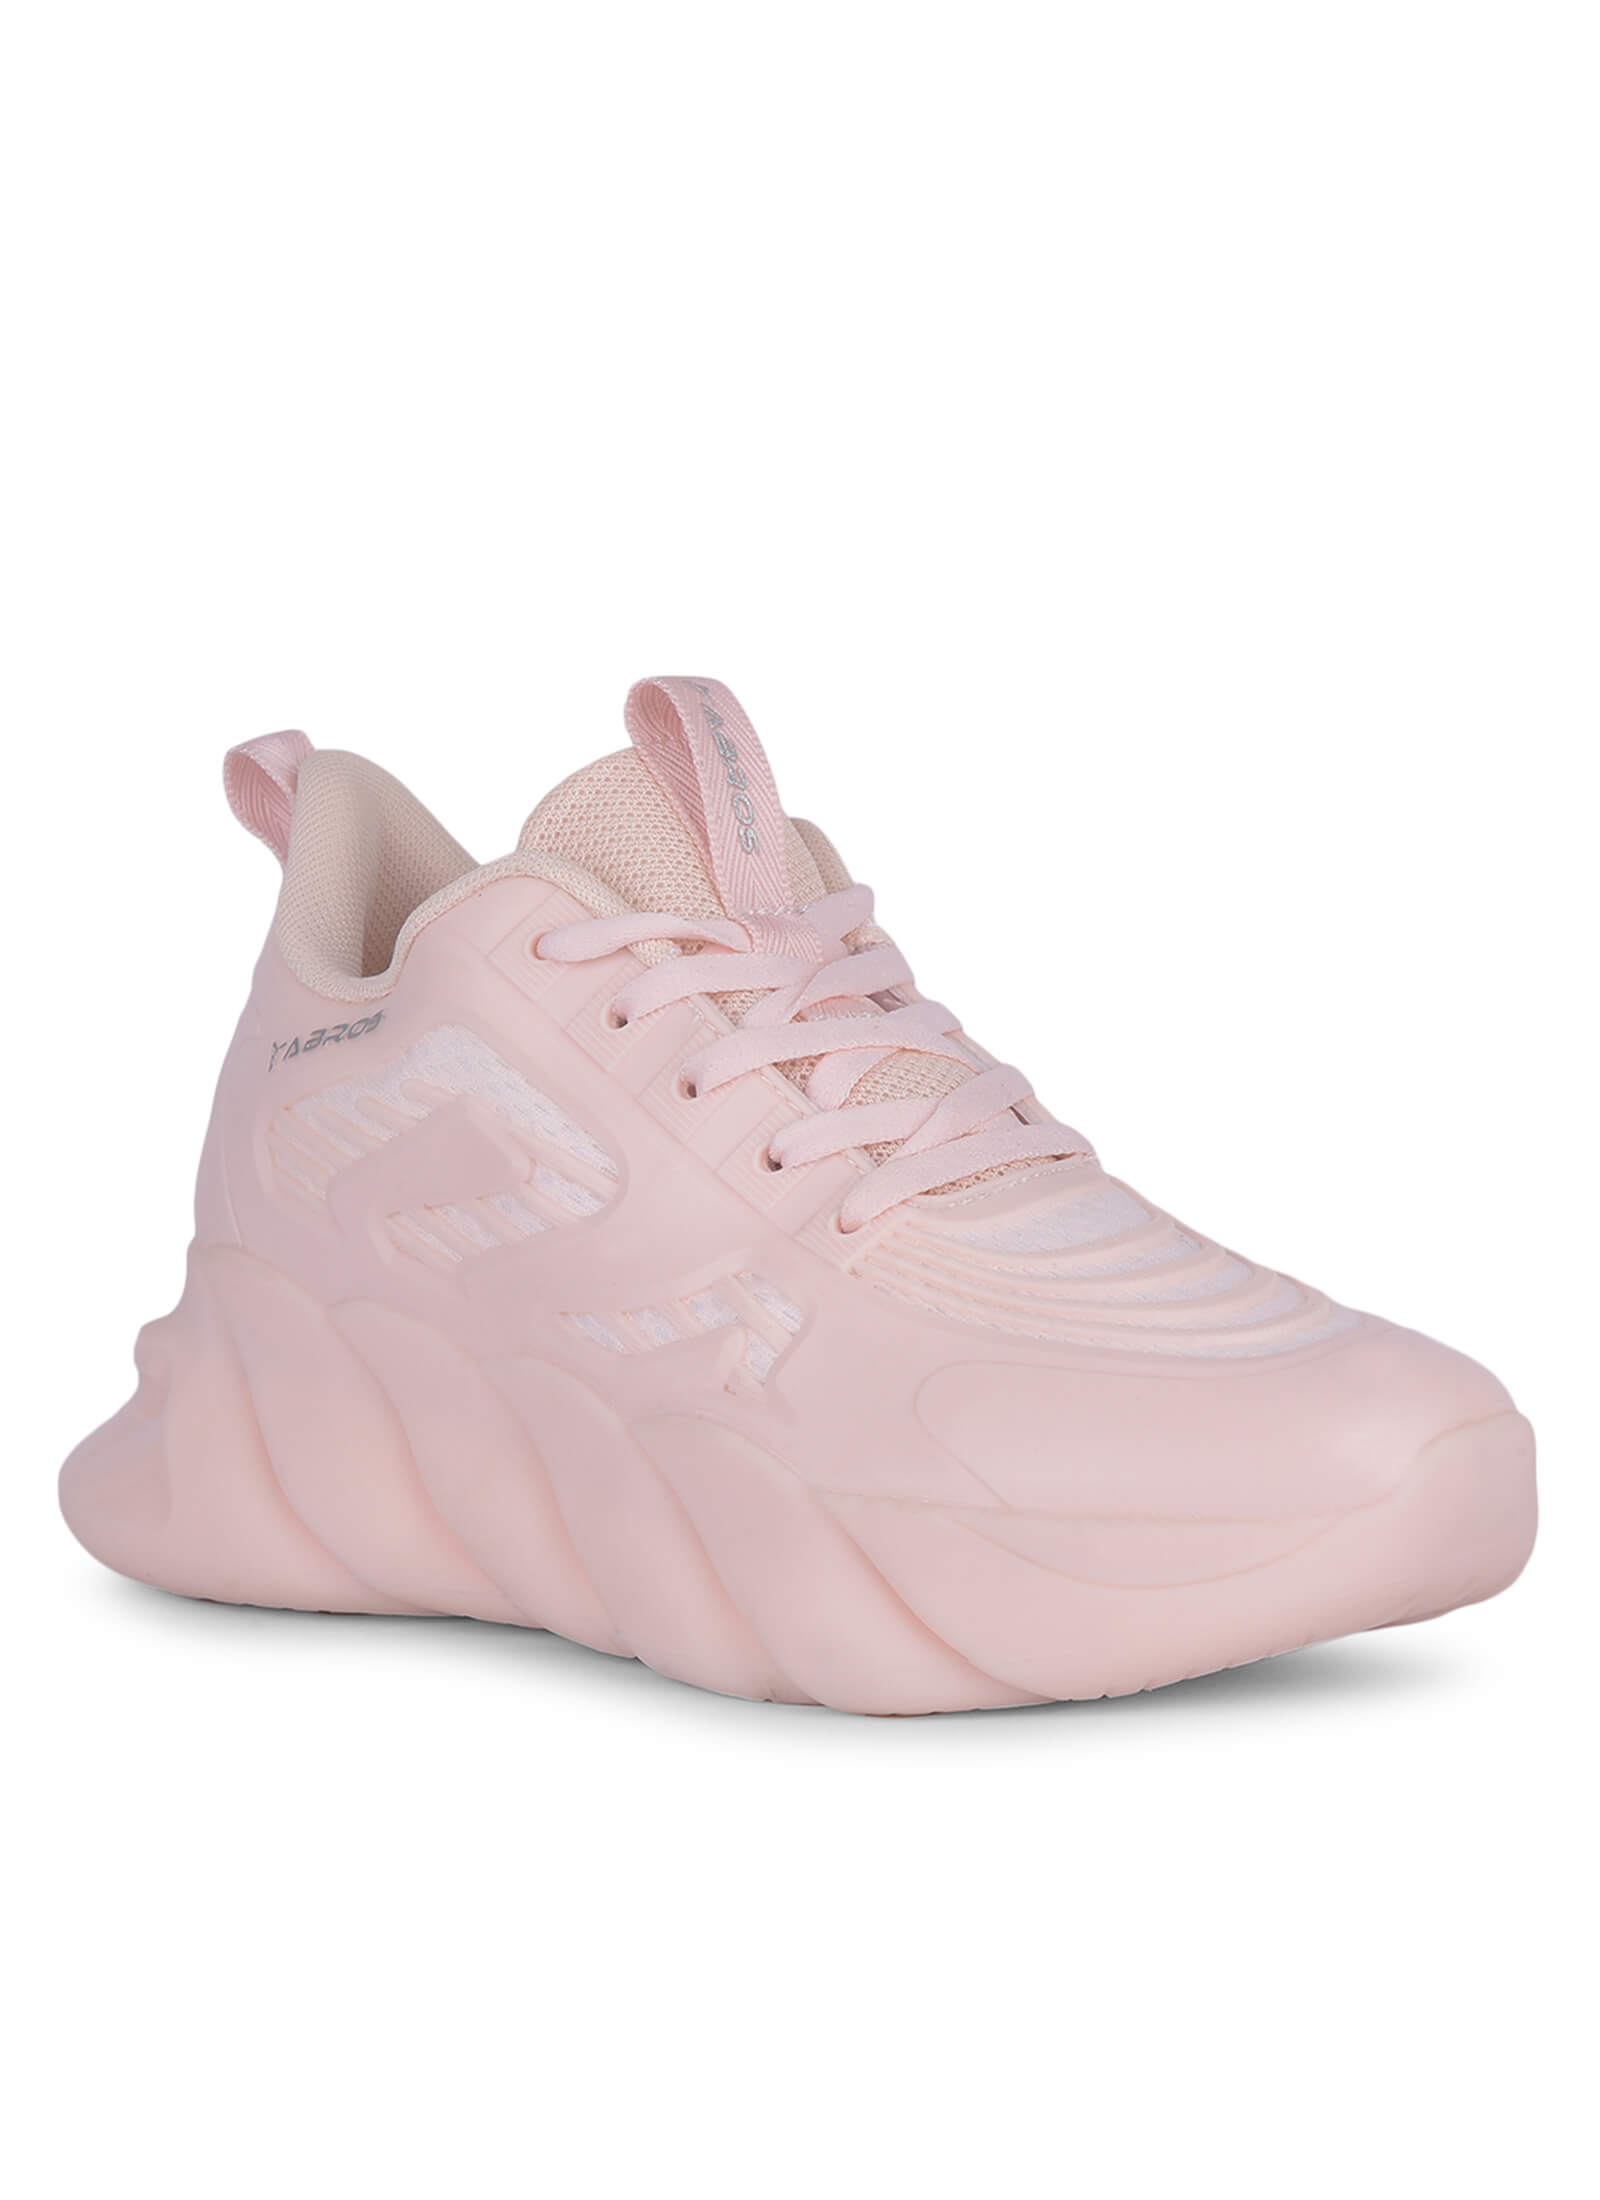 Angel-2 Sports Shoes For Women